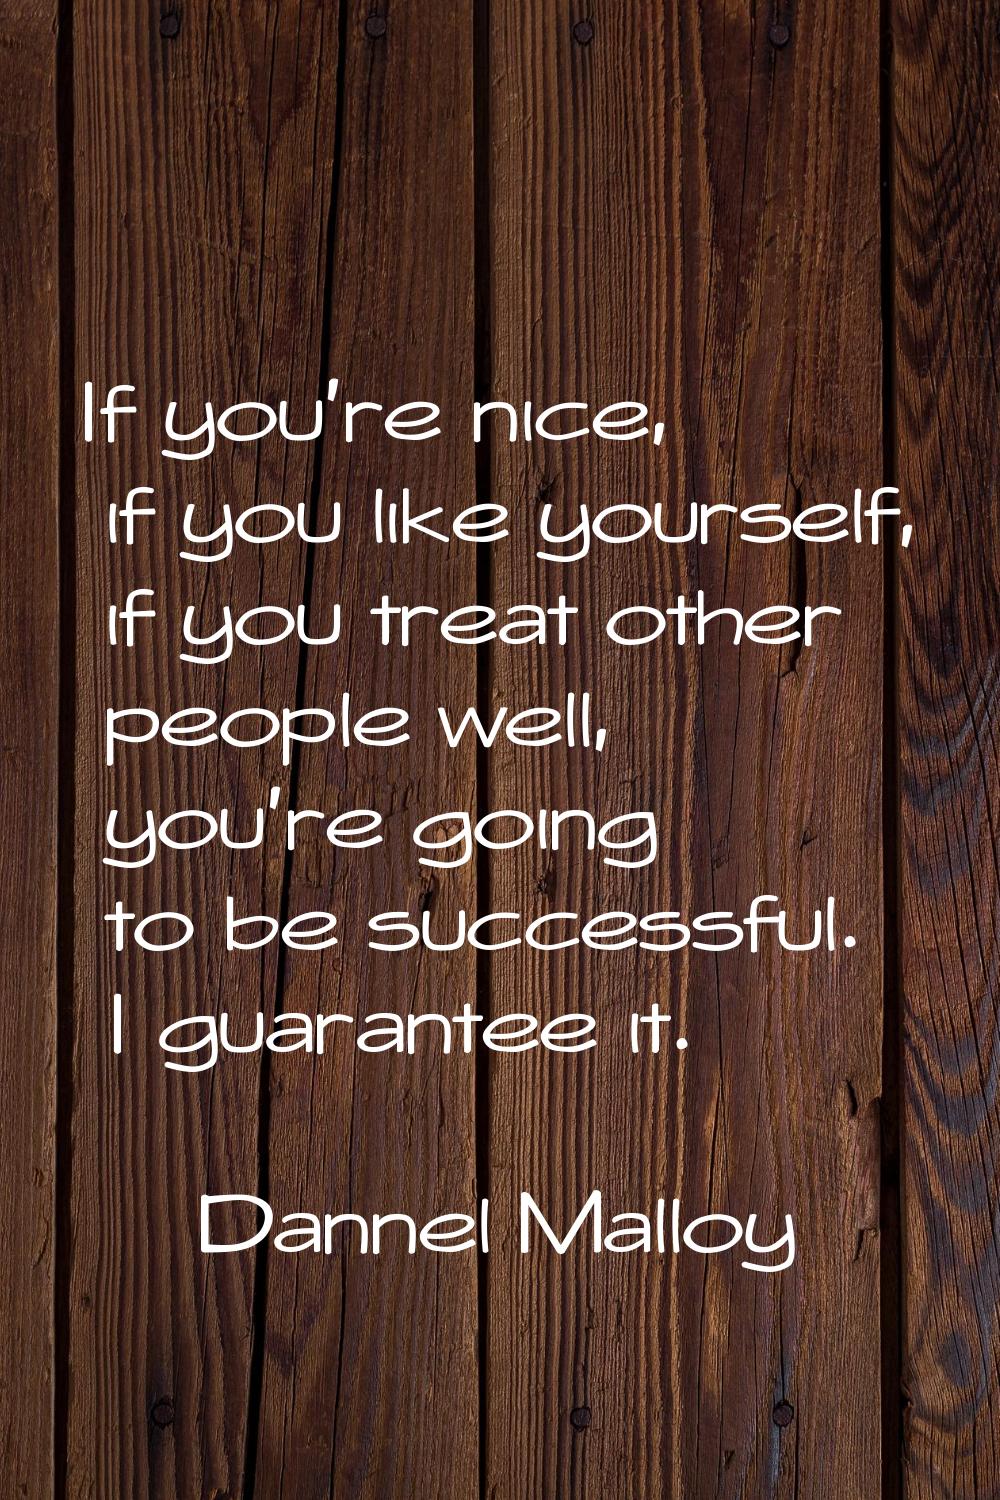 If you're nice, if you like yourself, if you treat other people well, you're going to be successful